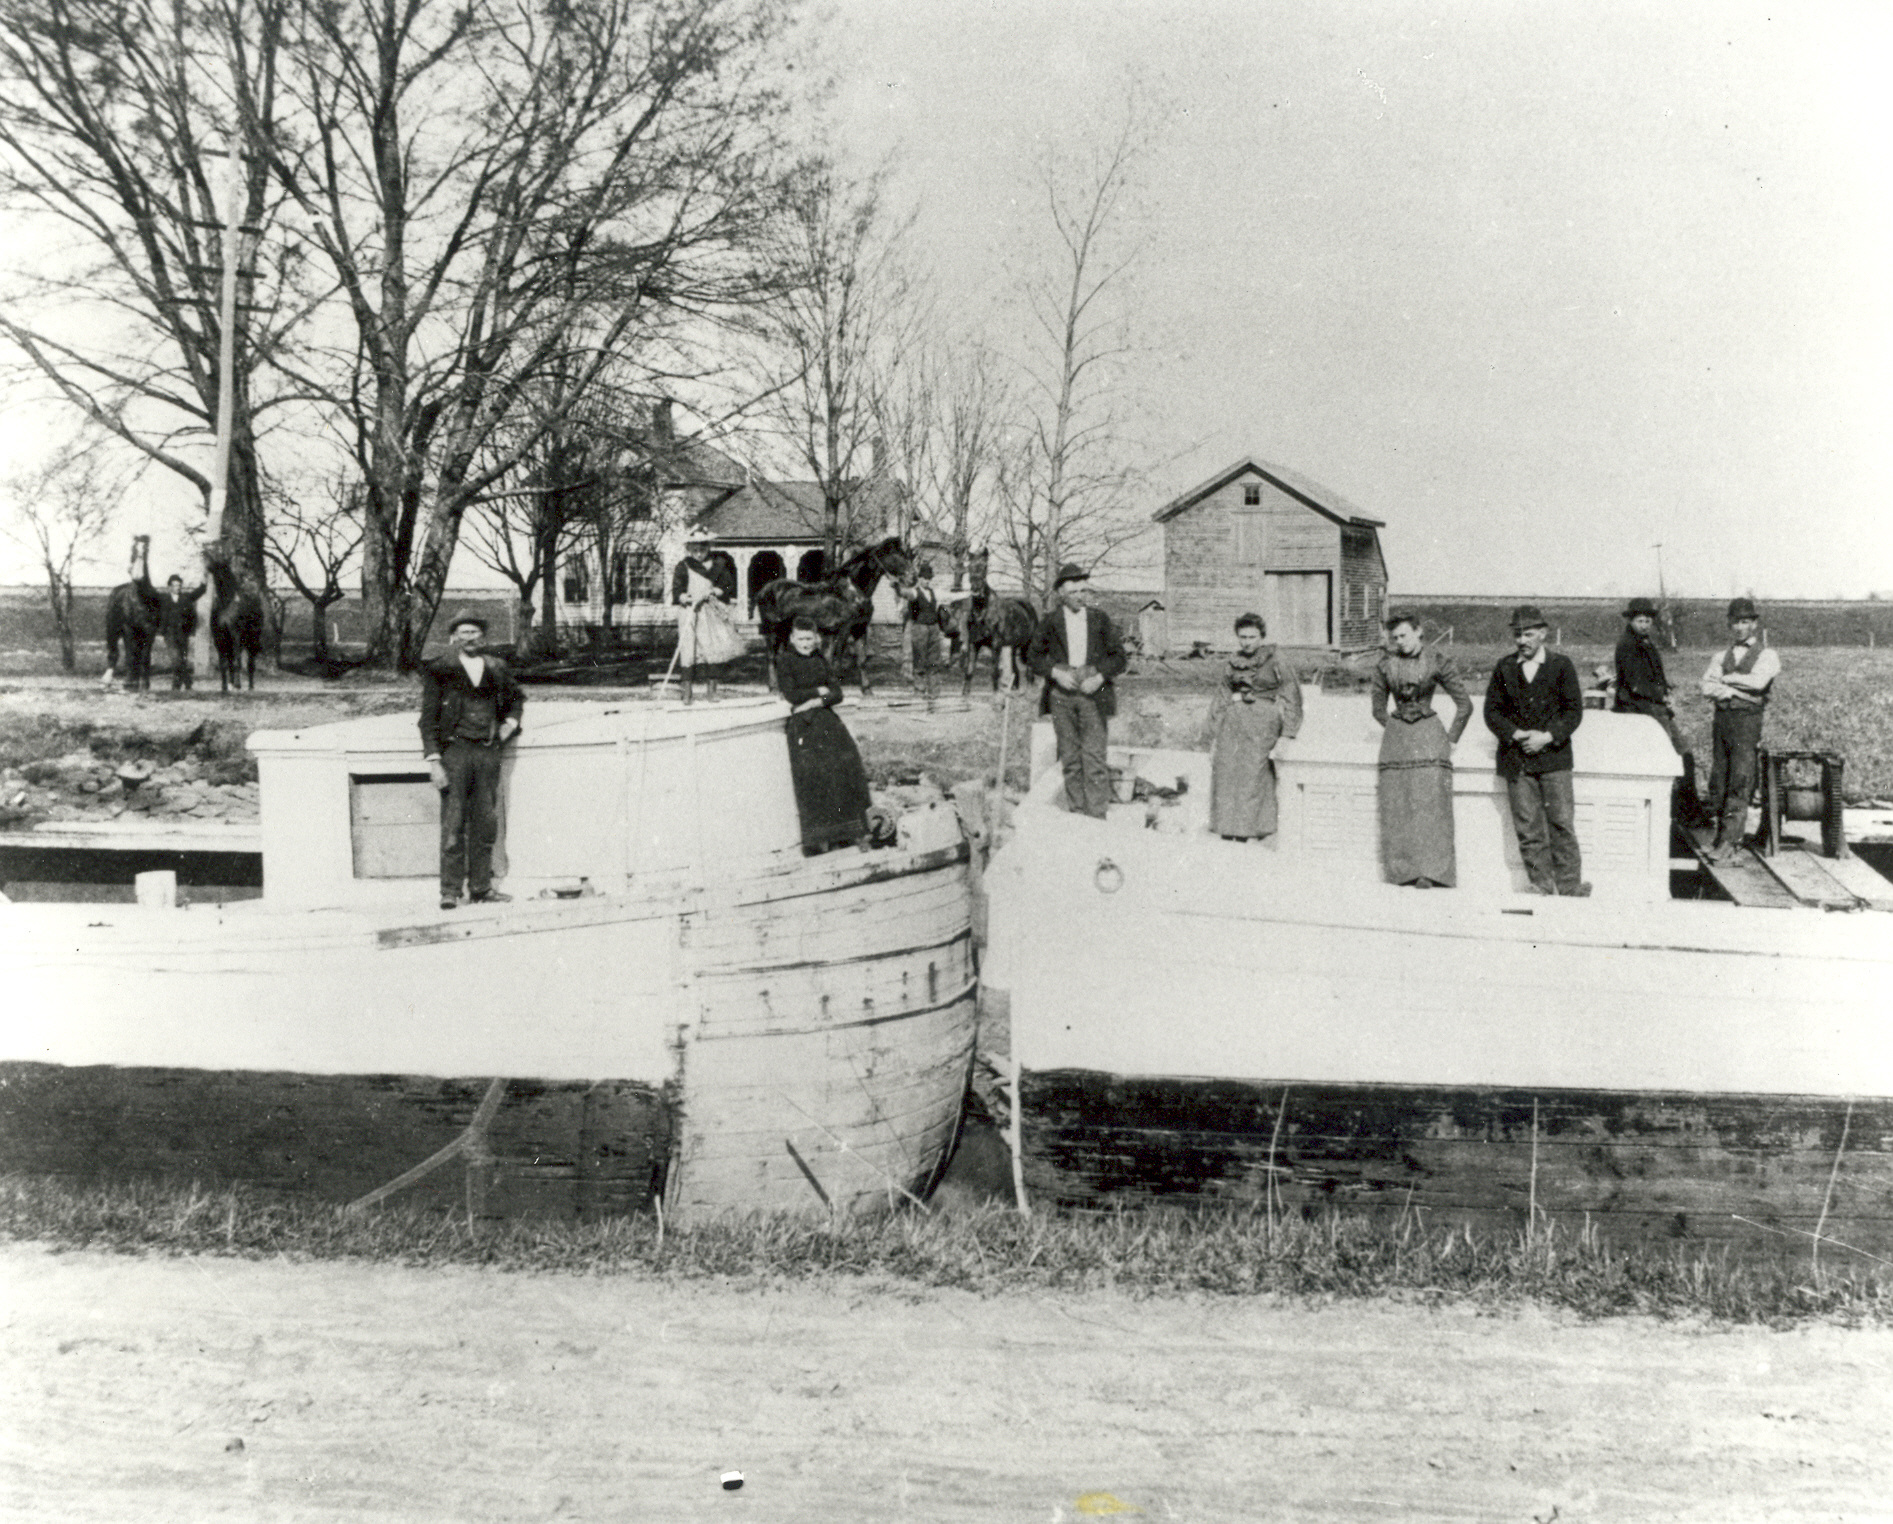 1820: The first packet boat arrives in Syracuse on the Erie Canal